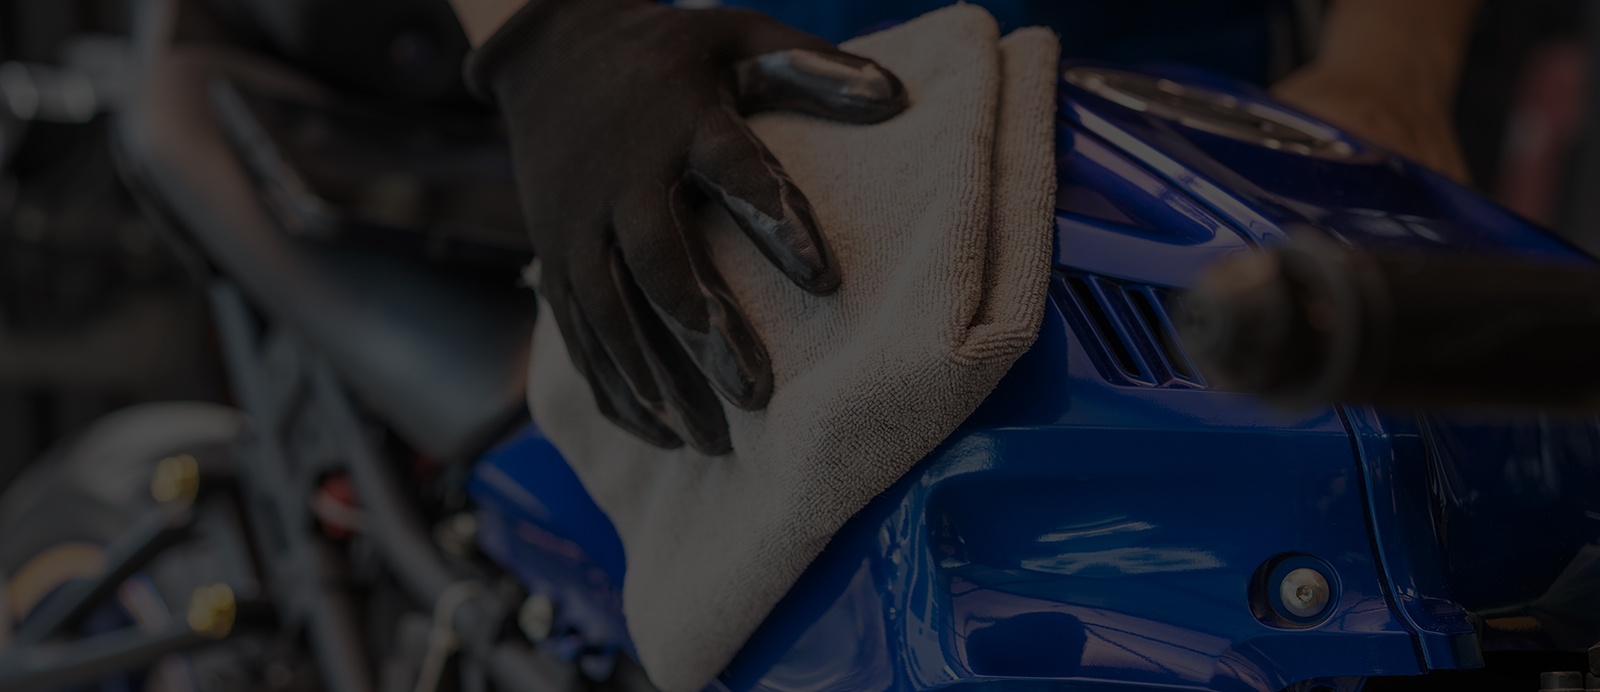 Professional Motorcycle Detailing / Motorcycle Cleaning Services